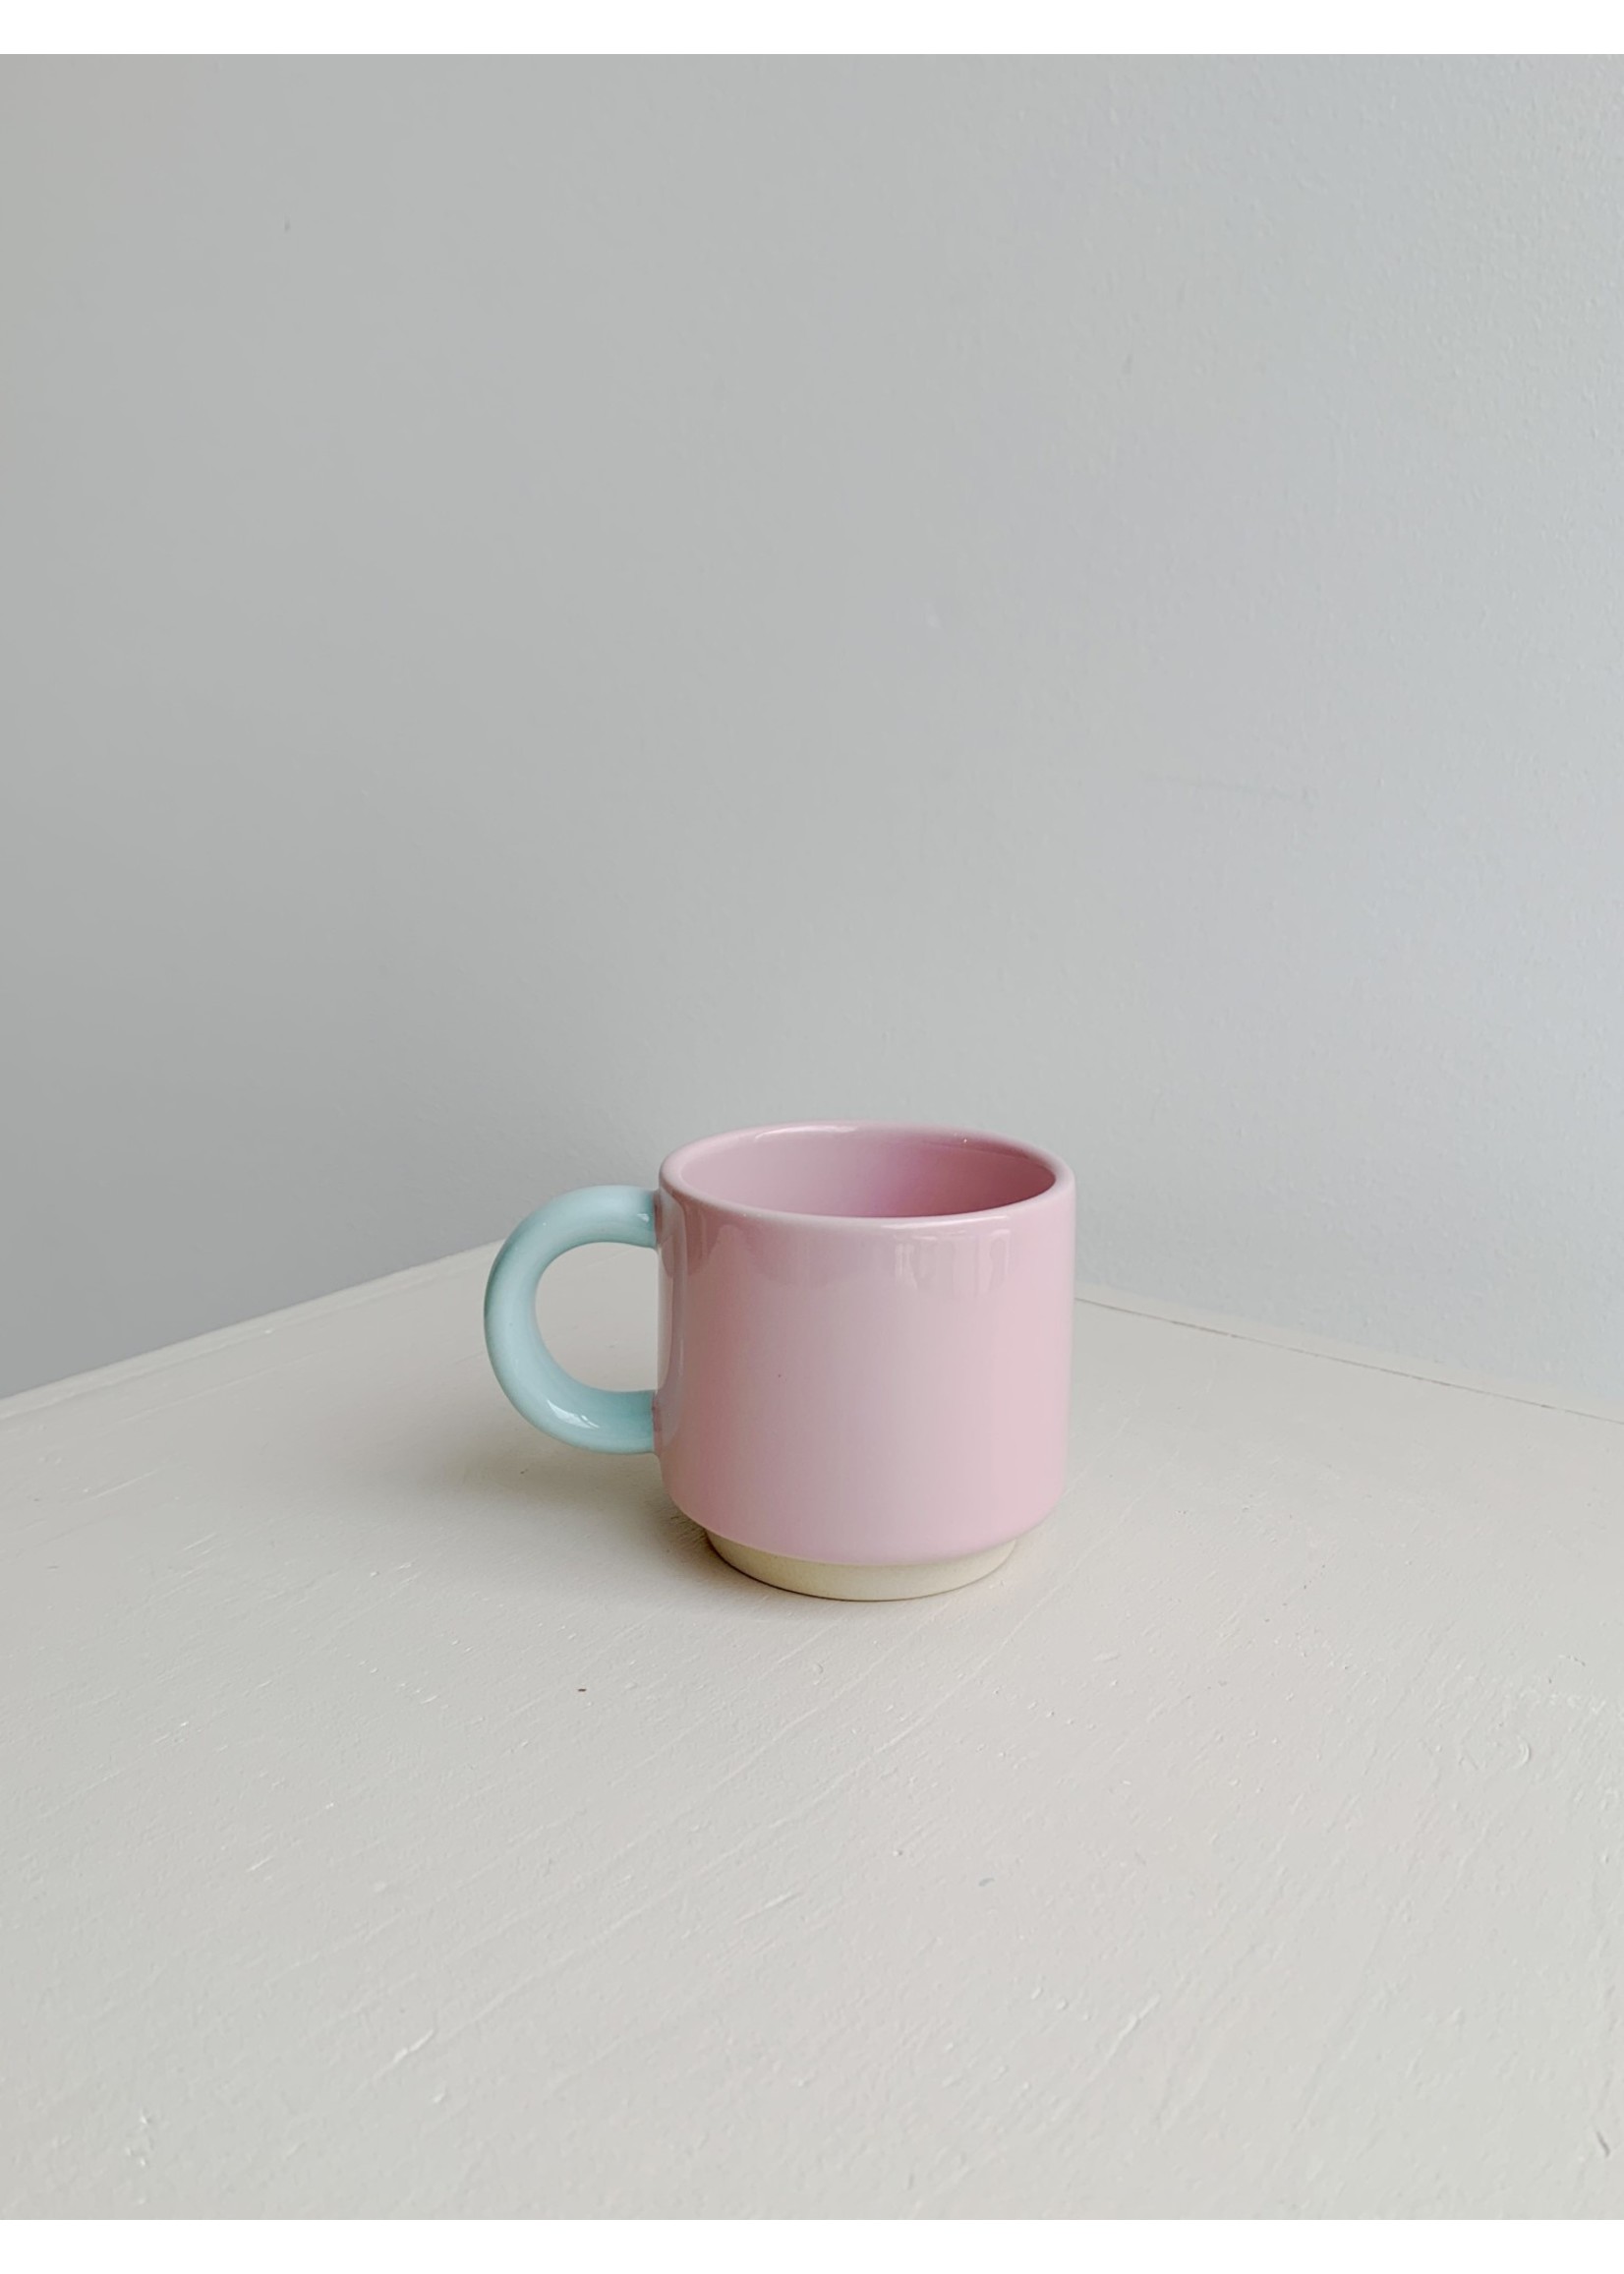 Lund London Skittle Stackable Mugs by Lund London